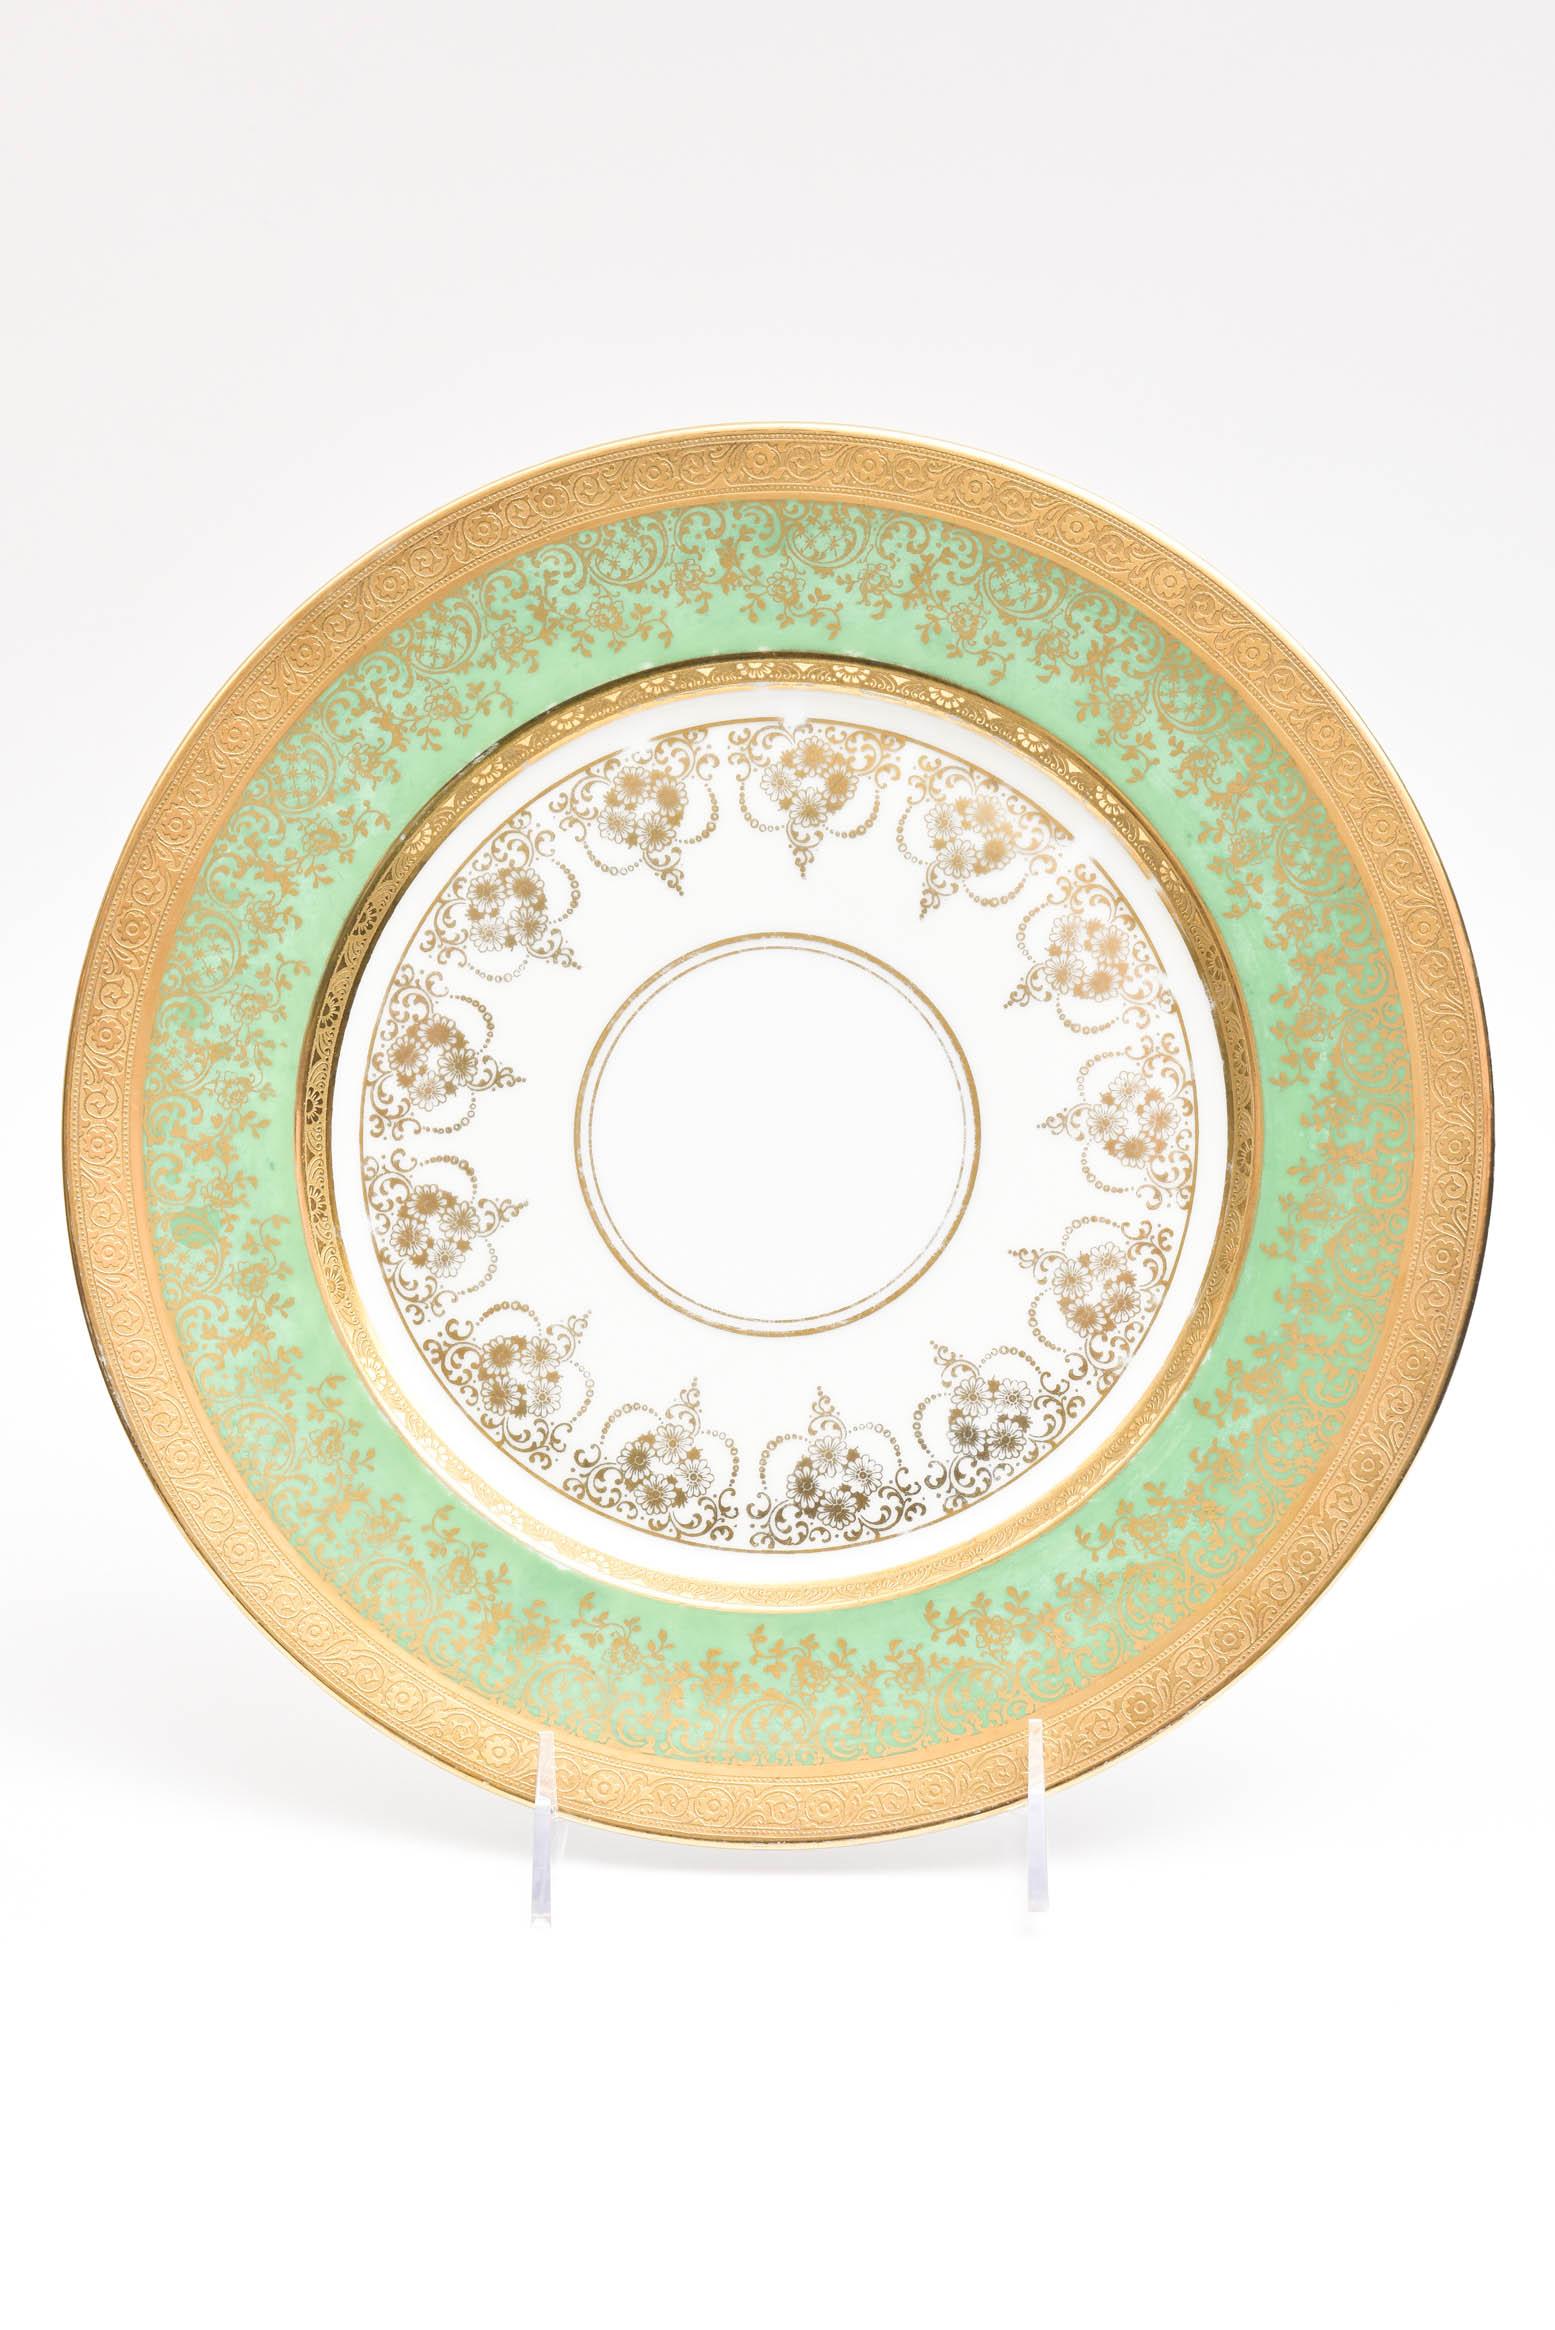 Hand-Crafted 12 Antique Green and Gilt Encrusted Service or Presentation Plates